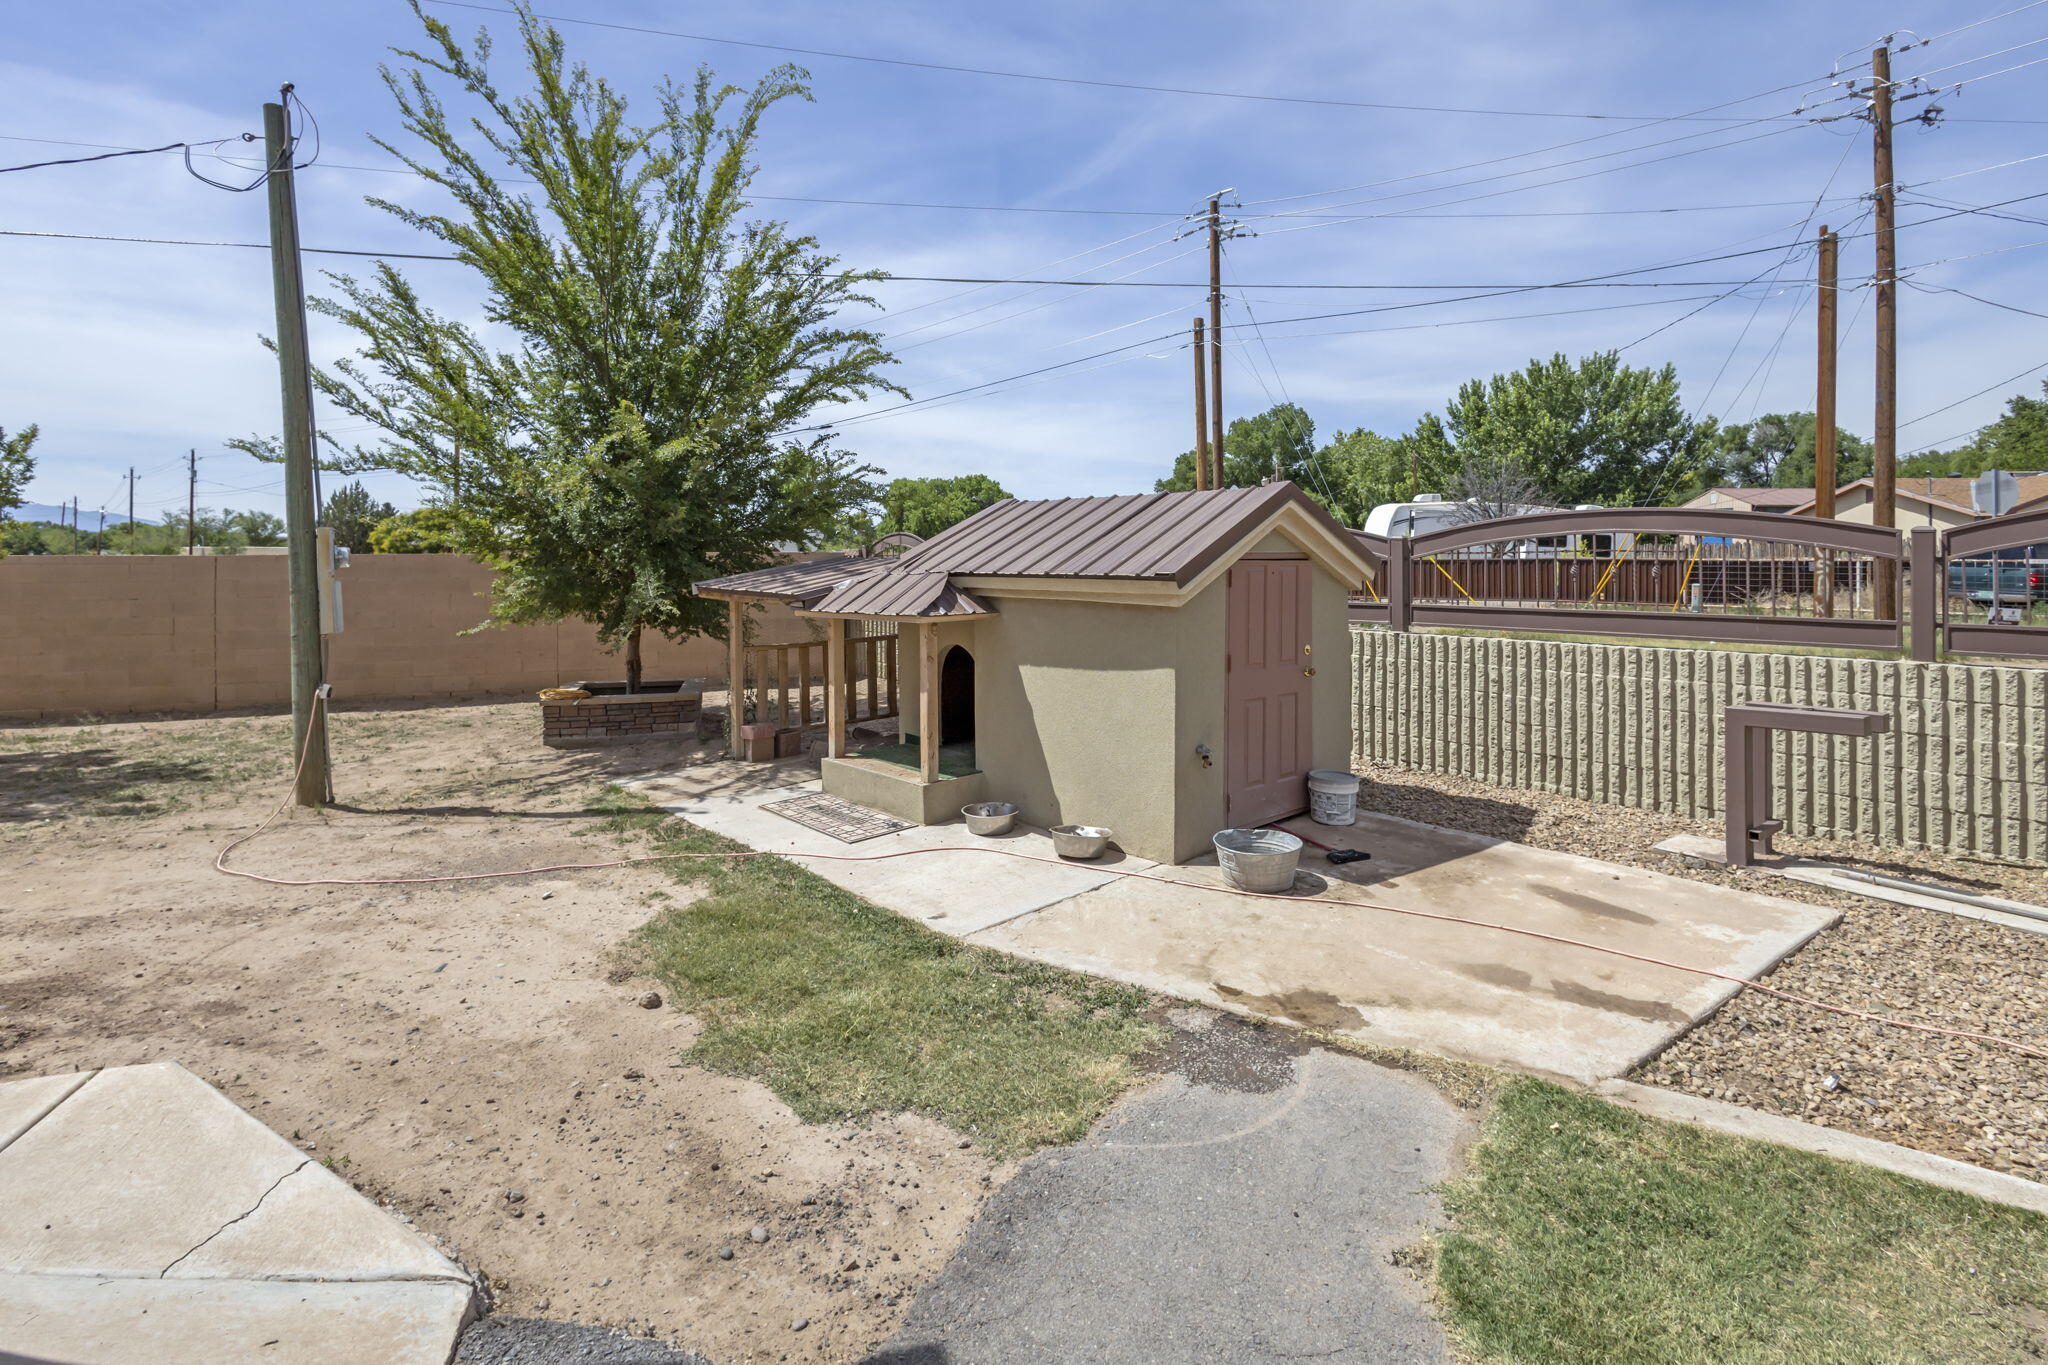 1 Laughlin Drive, Los Lunas, New Mexico 87031, 3 Bedrooms Bedrooms, ,2 BathroomsBathrooms,Residential,For Sale,1 Laughlin Drive,1052642